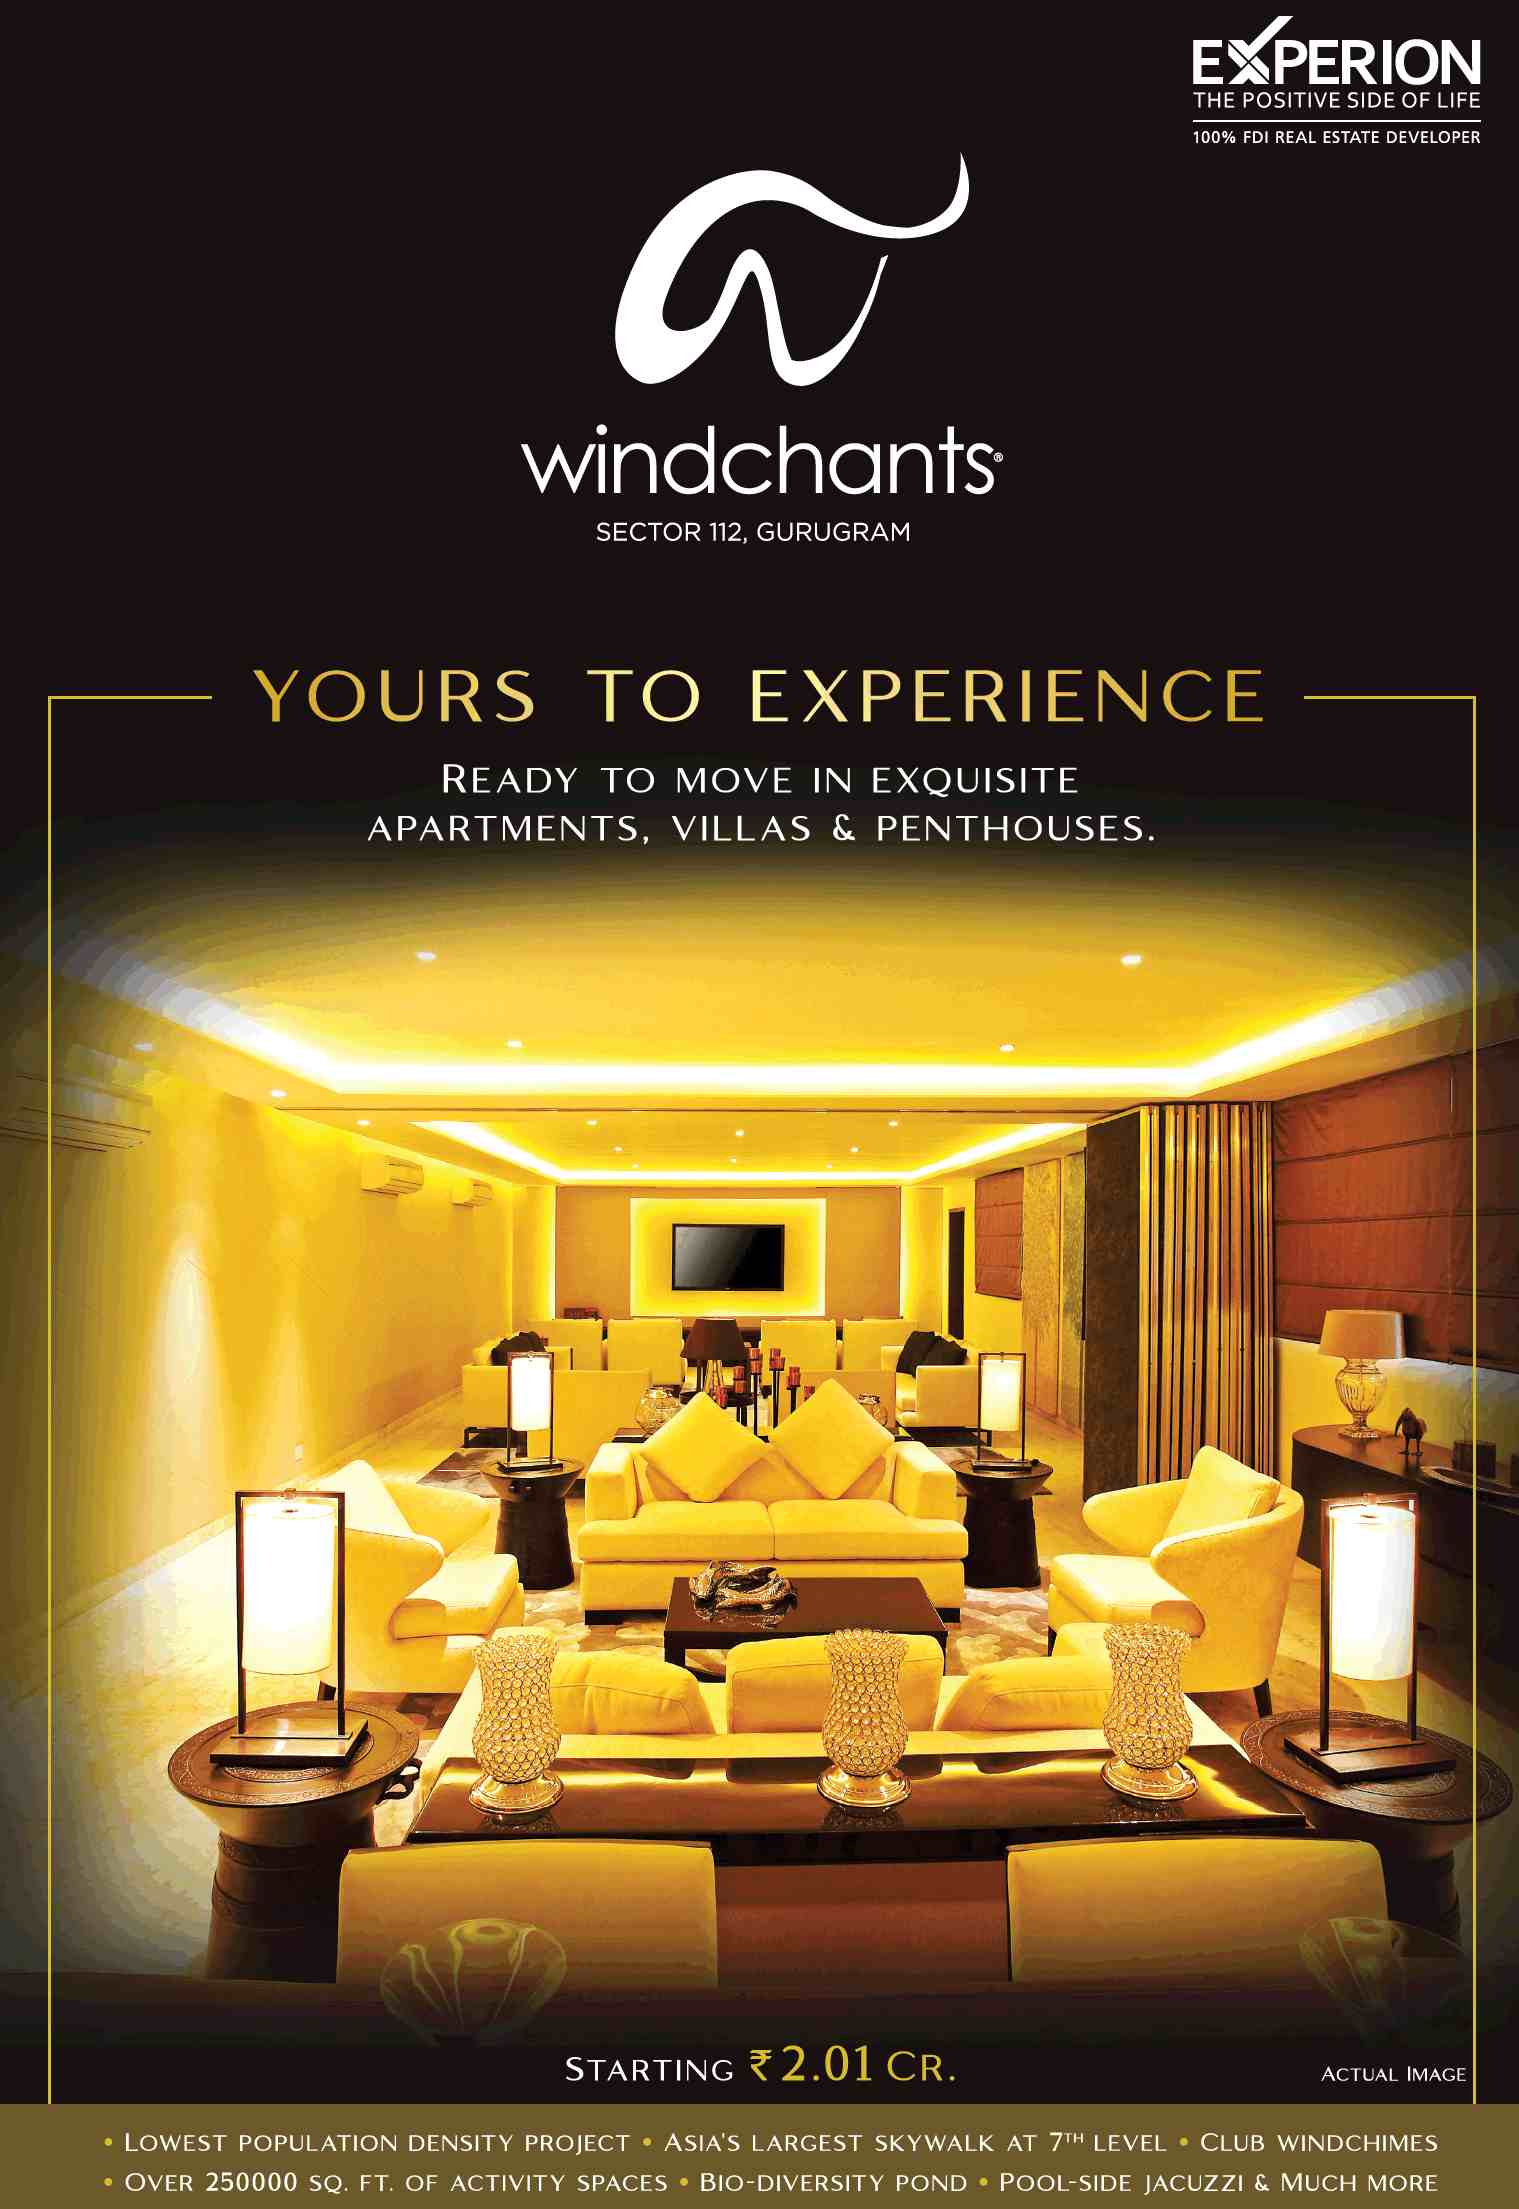 Book ready to move exquisite apartments, villas & penthouses at Experion Windchants in Gurgaon Update